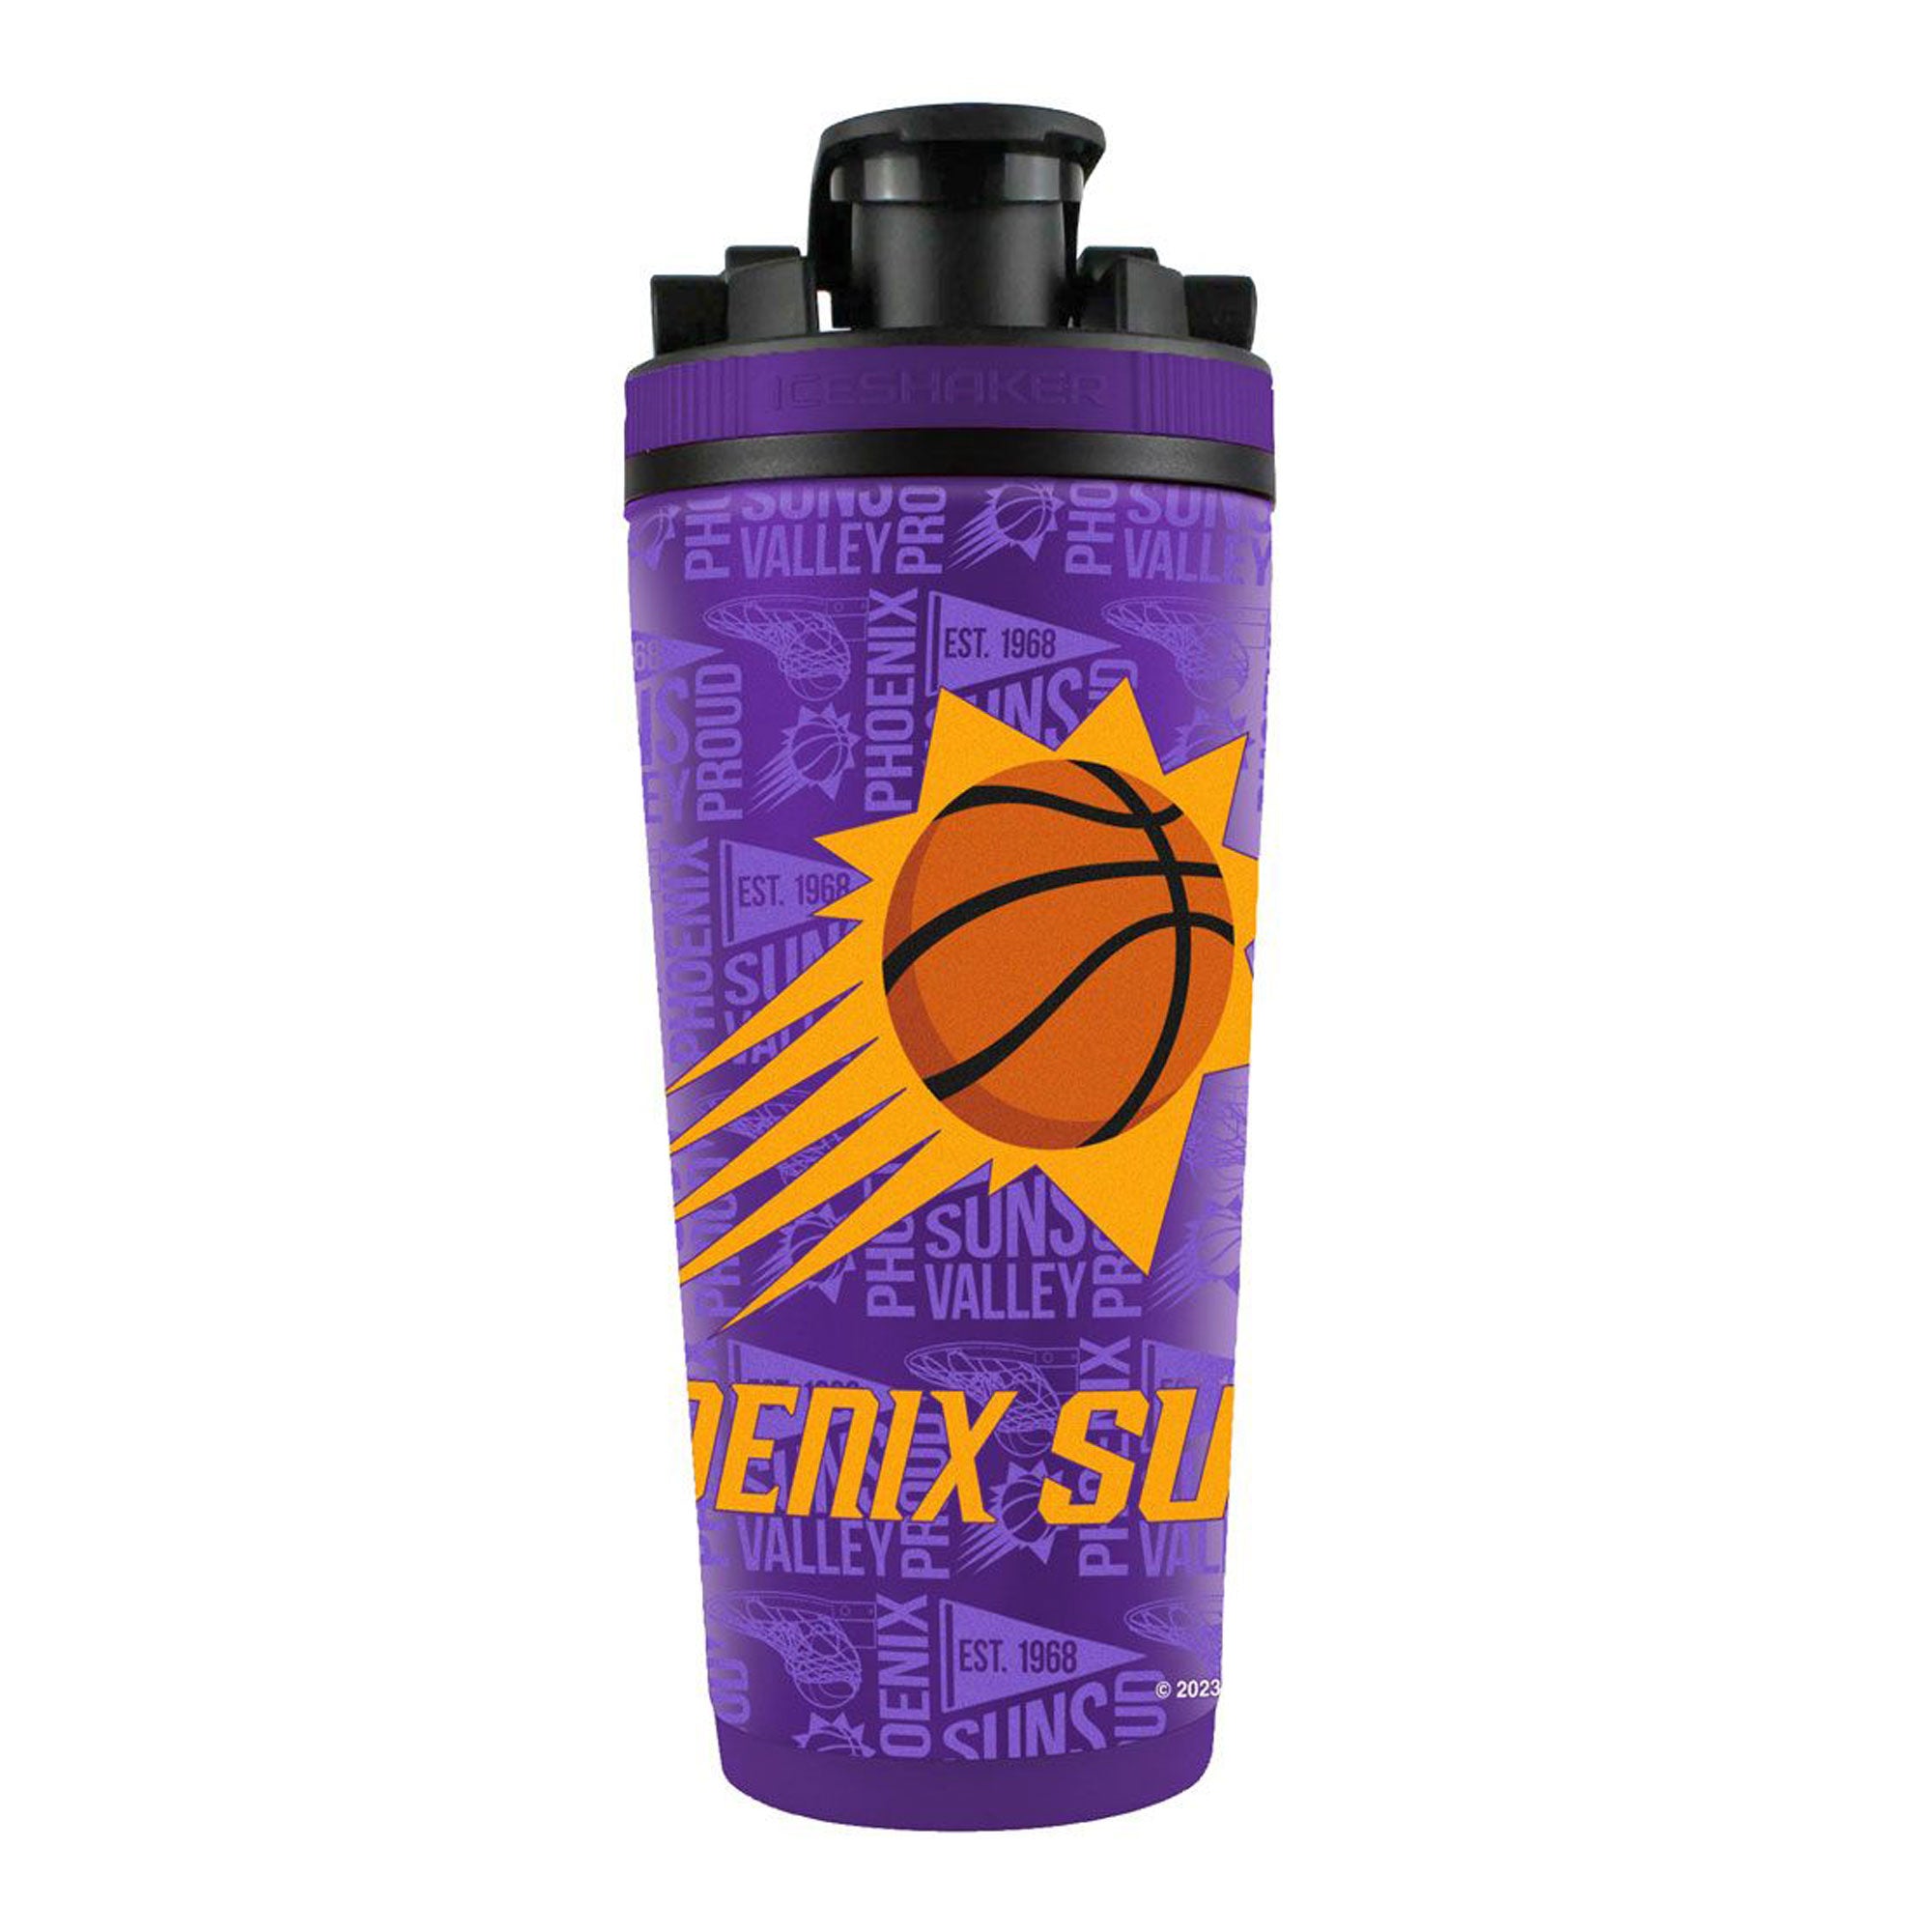 Officially Licensed Phoenix Suns 4D Ice Shaker